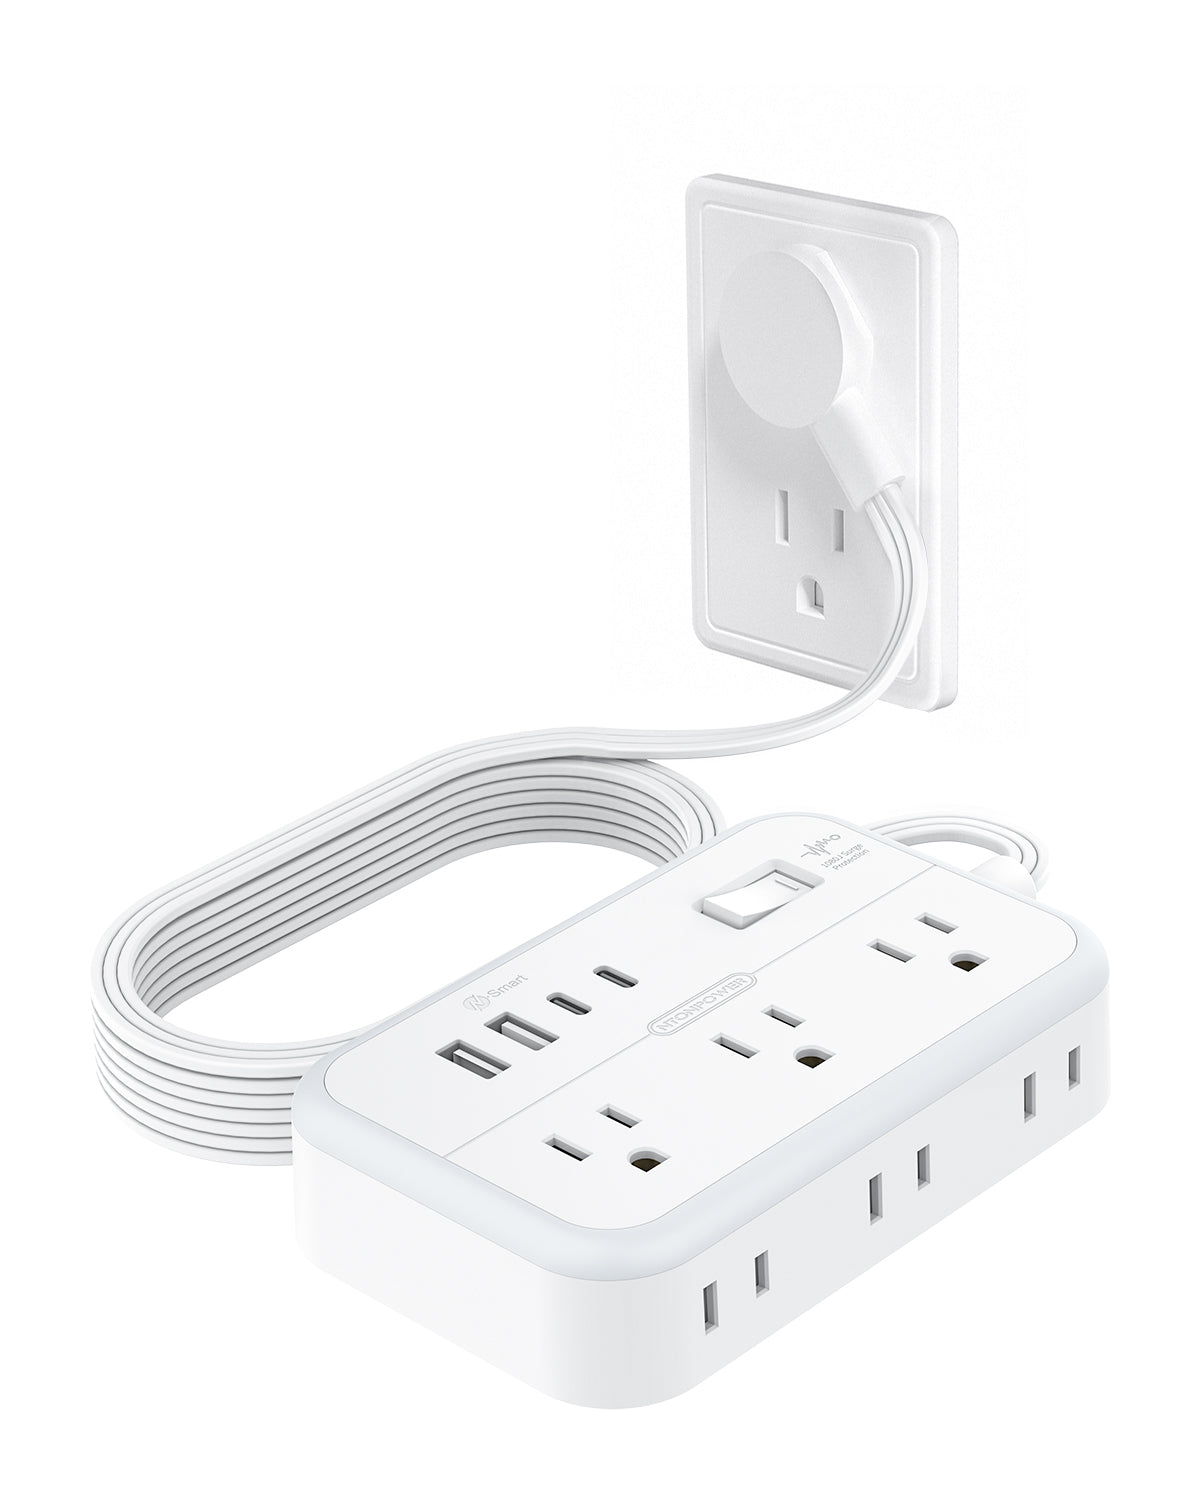 Ntonpower New Surge Basic Power Strip 6 Outlets 2 USB 2 TYPE-C Flat Cord